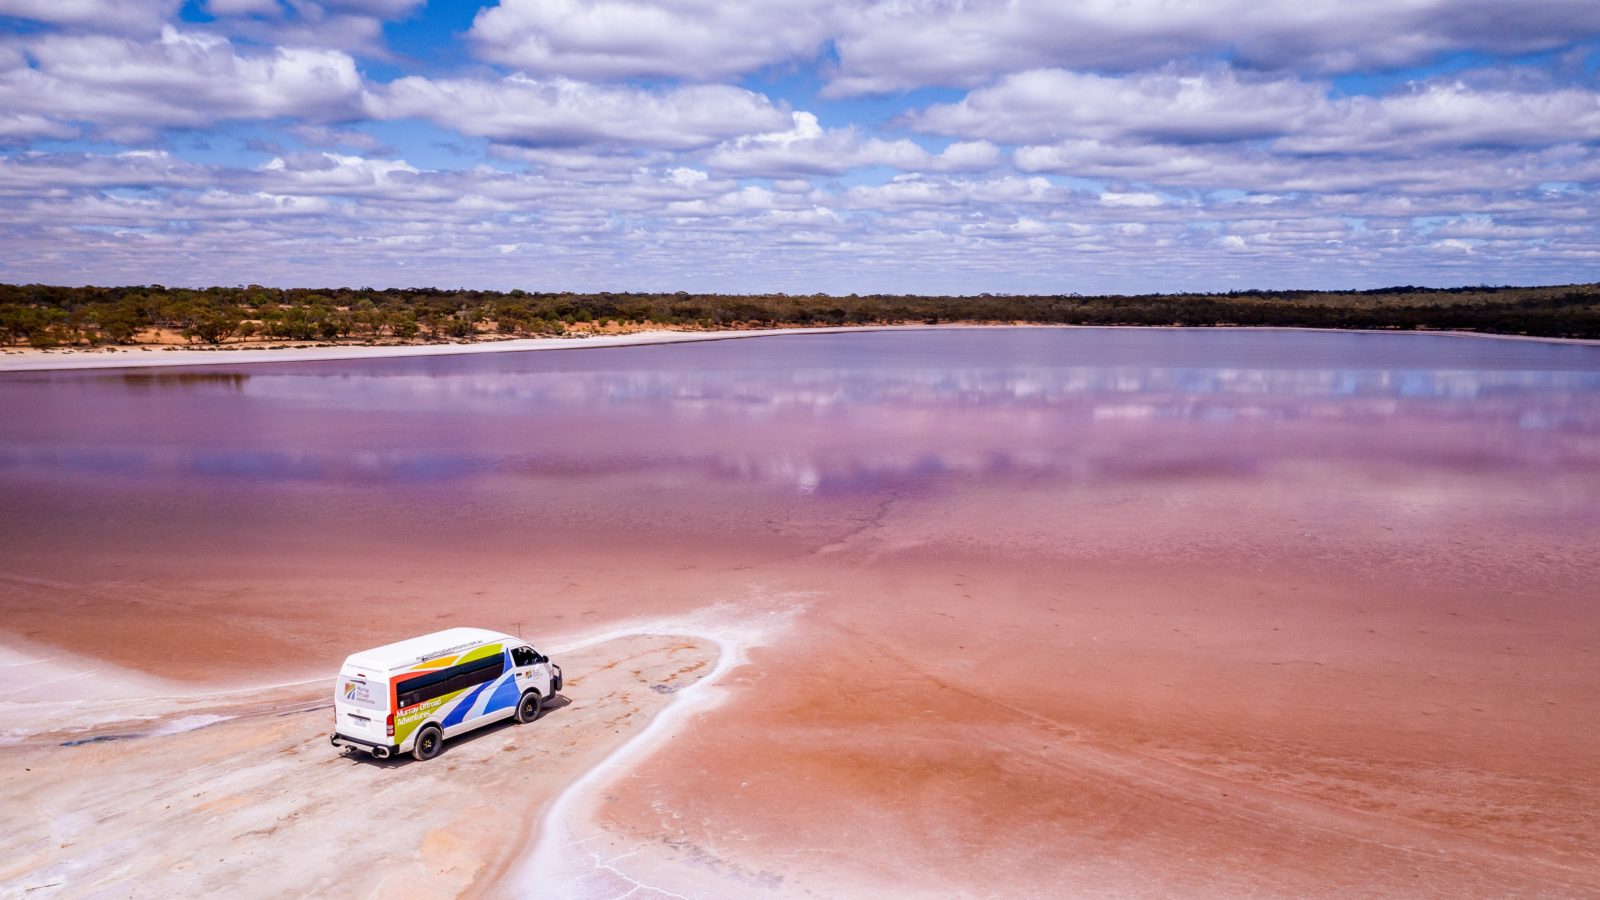 Travel into remote areas and discover fascintating salt lake treasures.